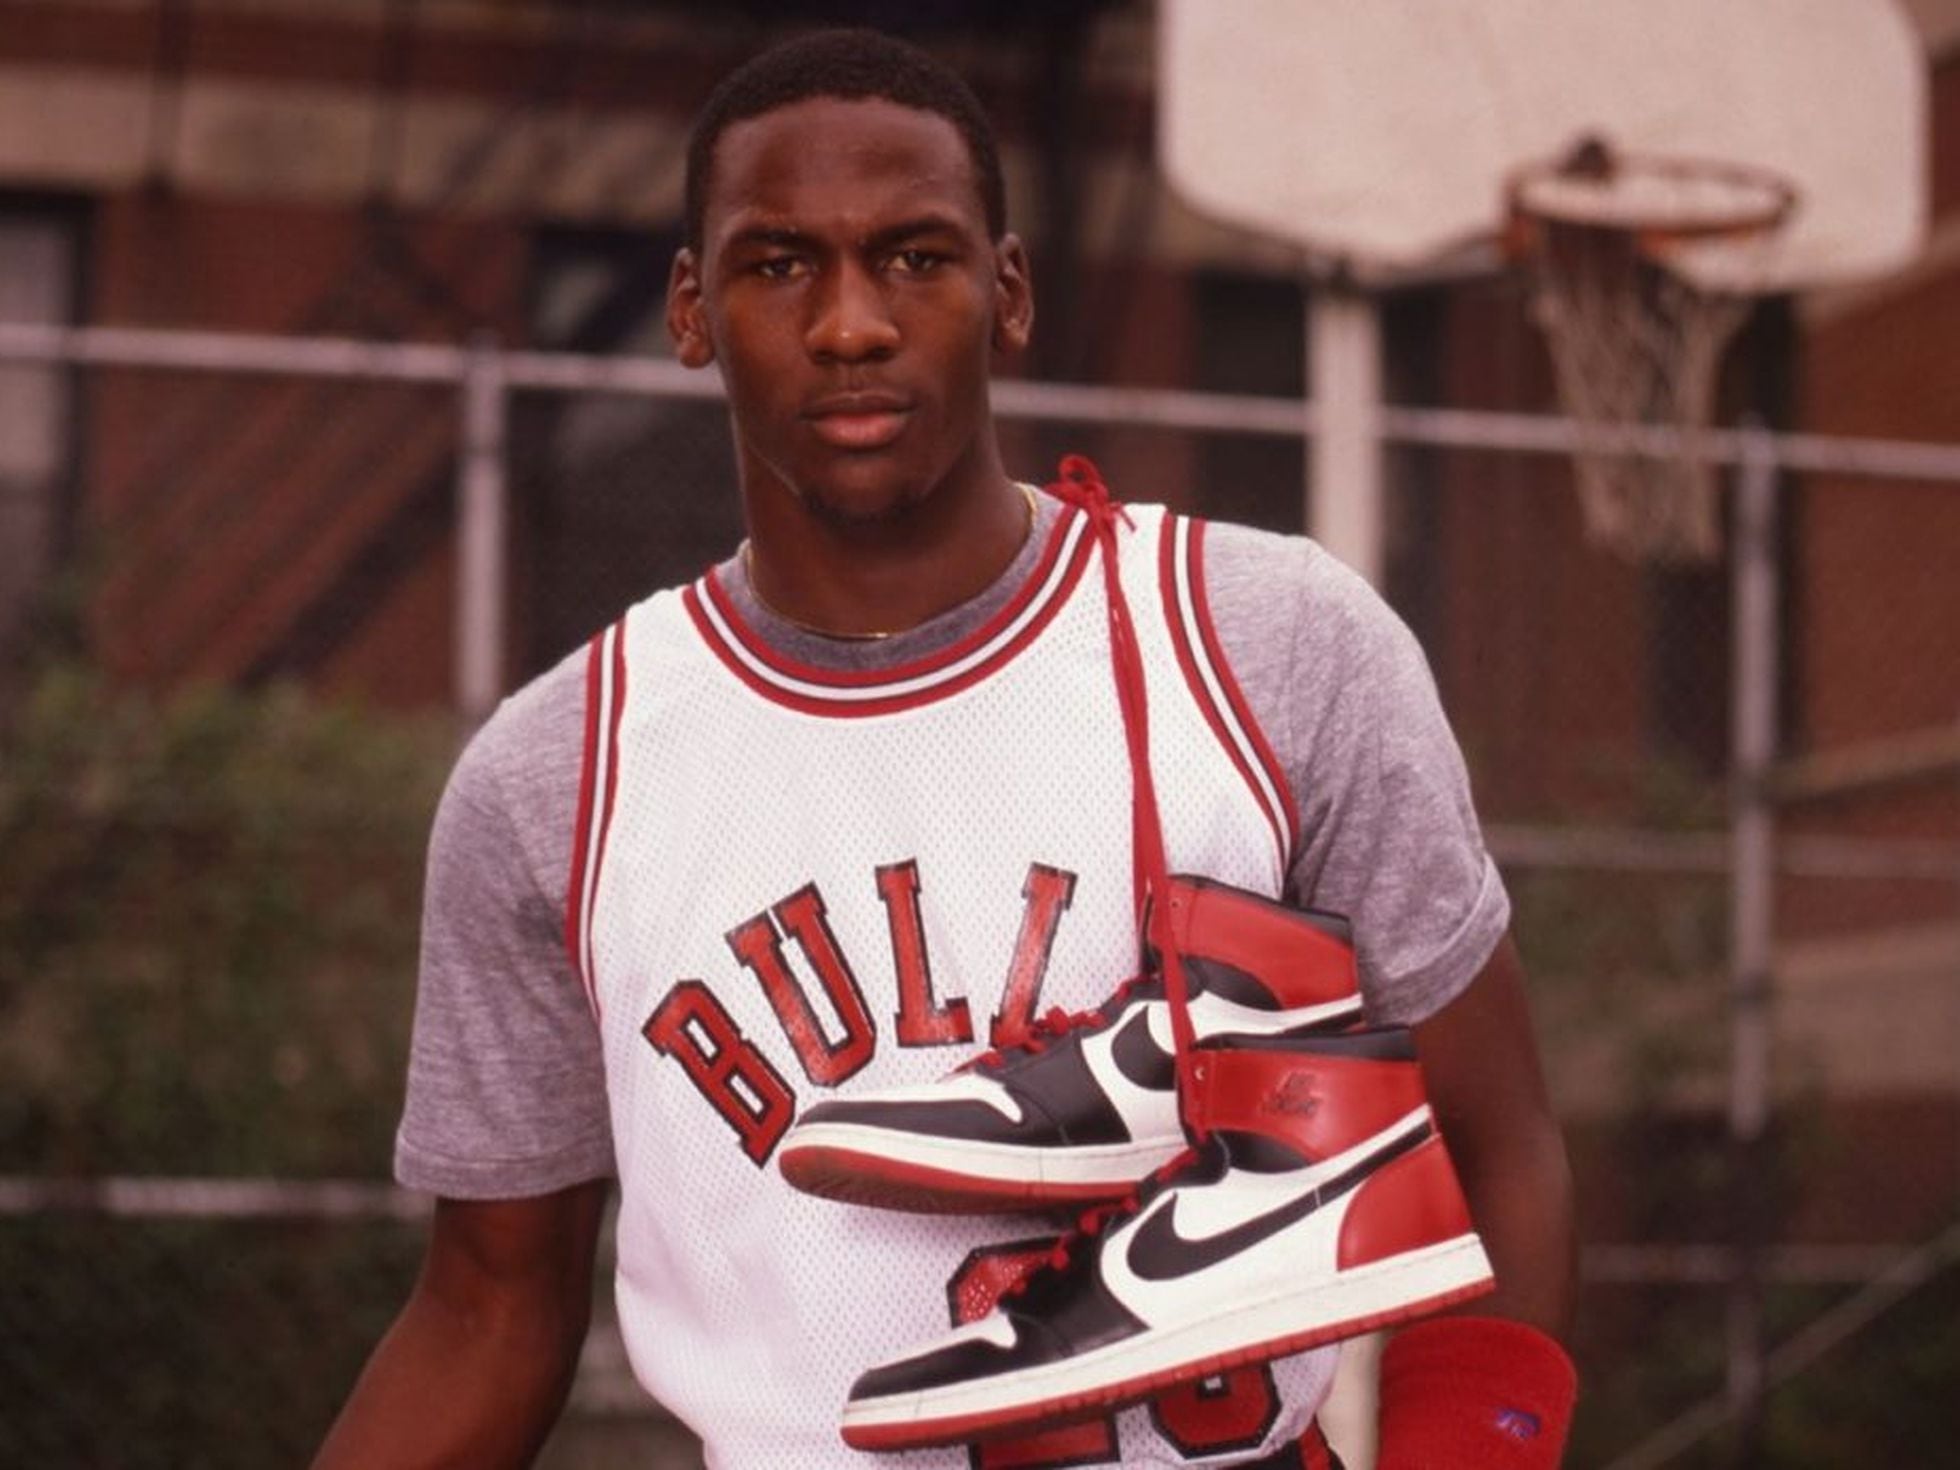 The day Michael Jordan's mother changed Nike's history forever: 'Even if you don't like you're going to listen to them' | Culture | EL PAÍS English